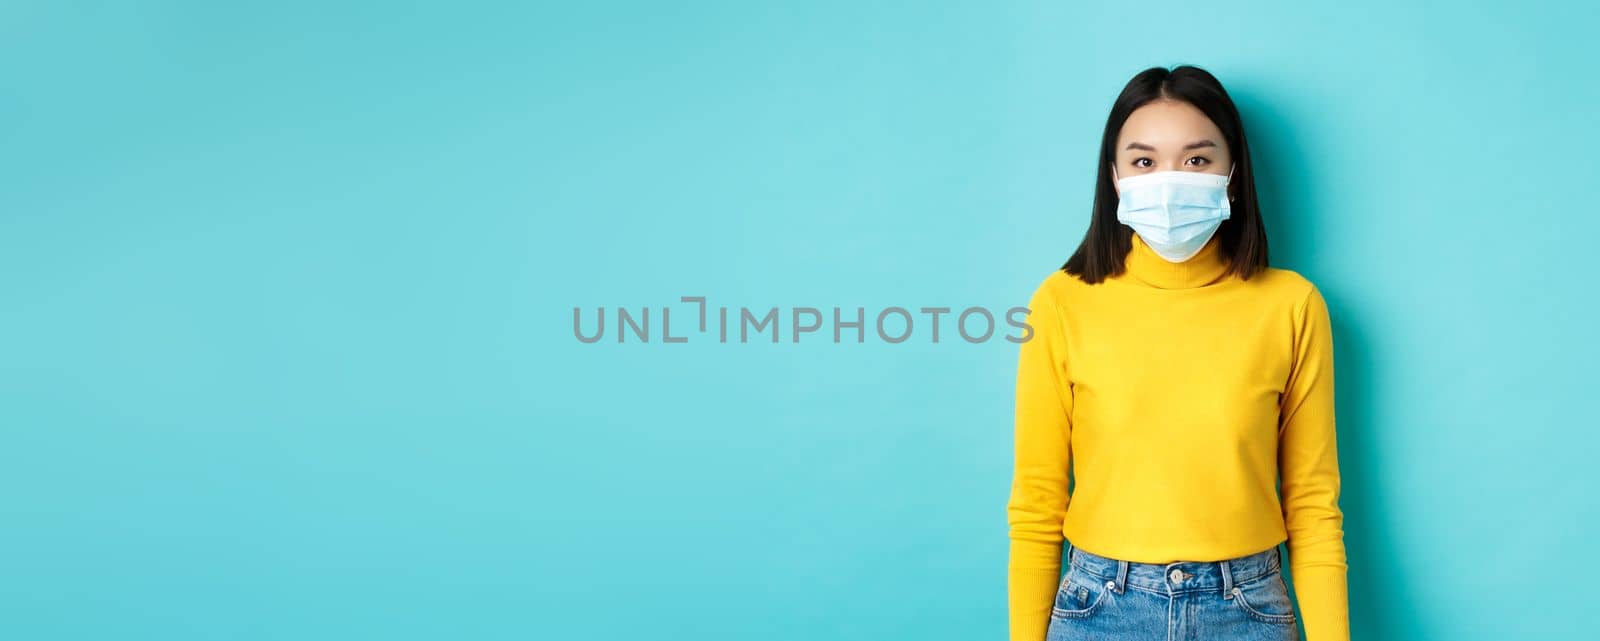 Covid-19, social distancing and pandemic concept. Teenage asian woman in medical mask, looking at camera and standing against blue background in yellow sweater.